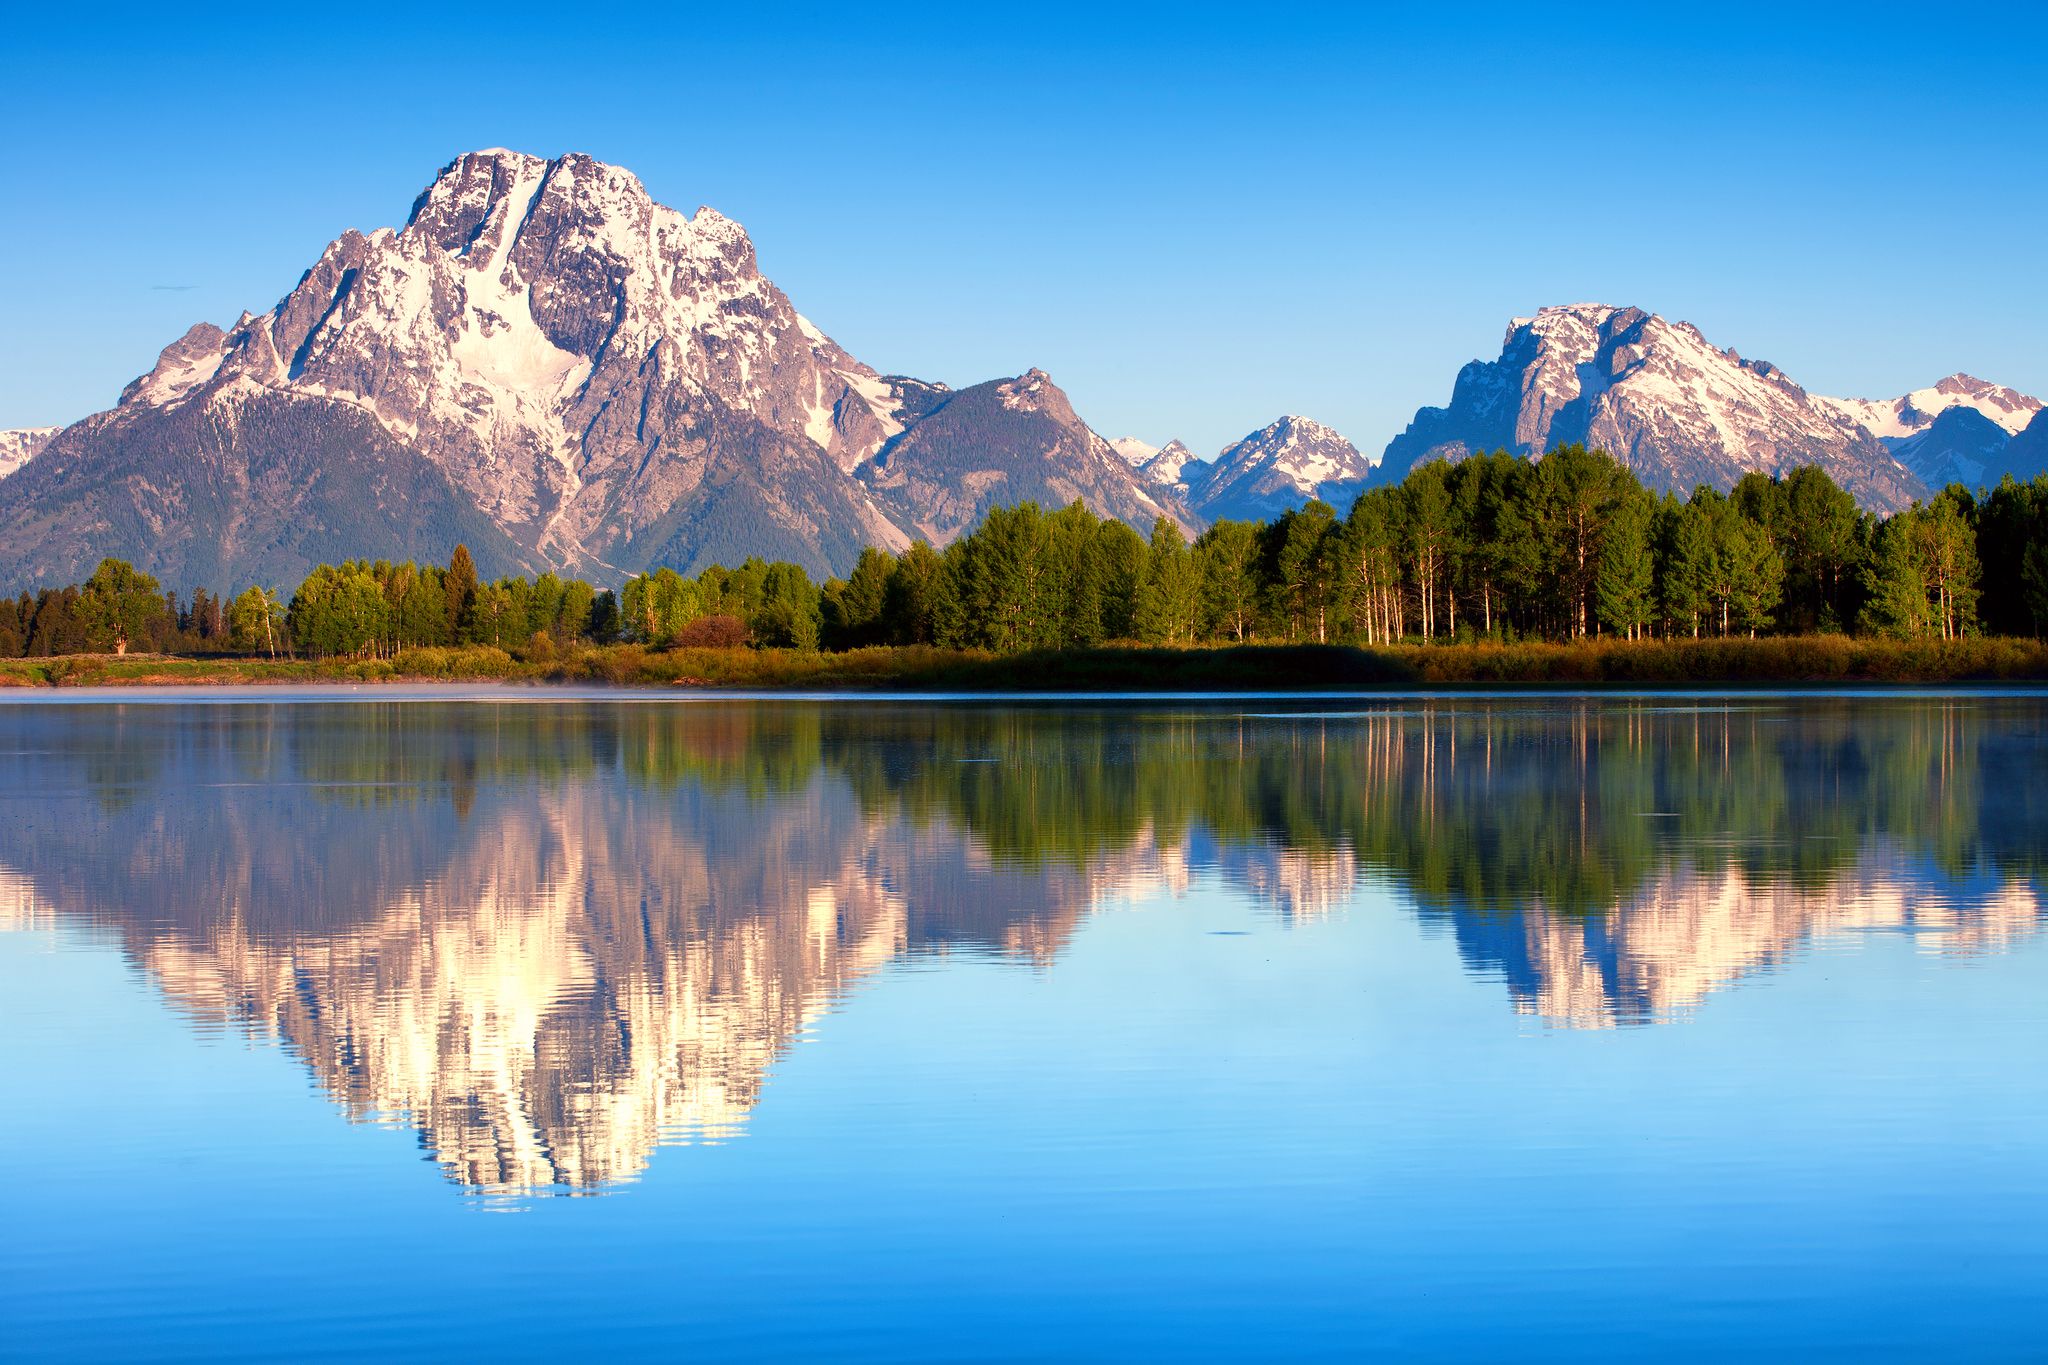 usa, Wyoming, Grand, Teton, National, Park, Mount, Moran, Lake, Jackson, Nature, Summer, Morning, Forest, Reflection, Trees, Shore, Forest Wallpaper HD / Desktop and Mobile Background